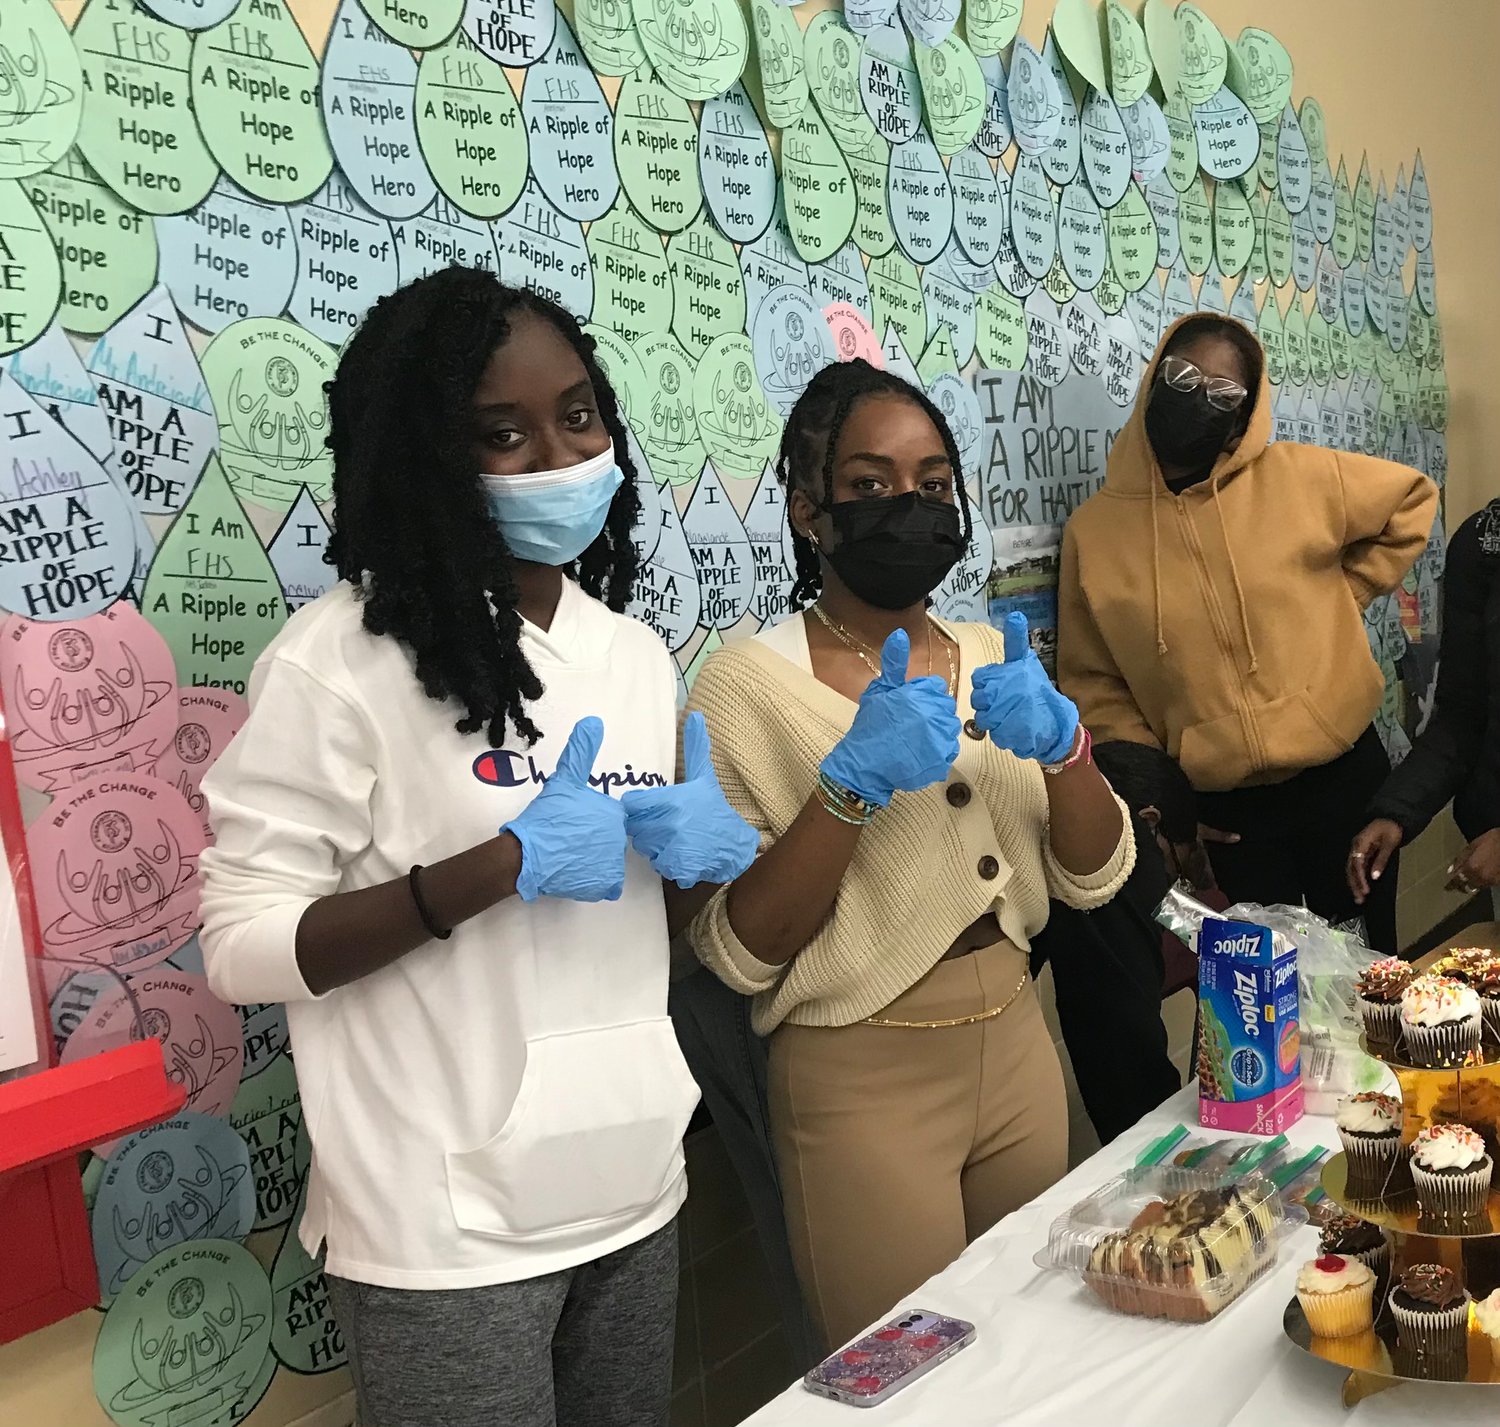 From left, members of the Freeport High School Human Relations Club,  Gracelyn Jean-Baptiste, Anya Simon and Hope Coardes, helped raised funds for the Haitian nonprofit, Association for the Children of Regnier Haiti, by selling paper drops to students in which an impressive Current of Collective Hope was created on the wall in the school’s cafeteria.